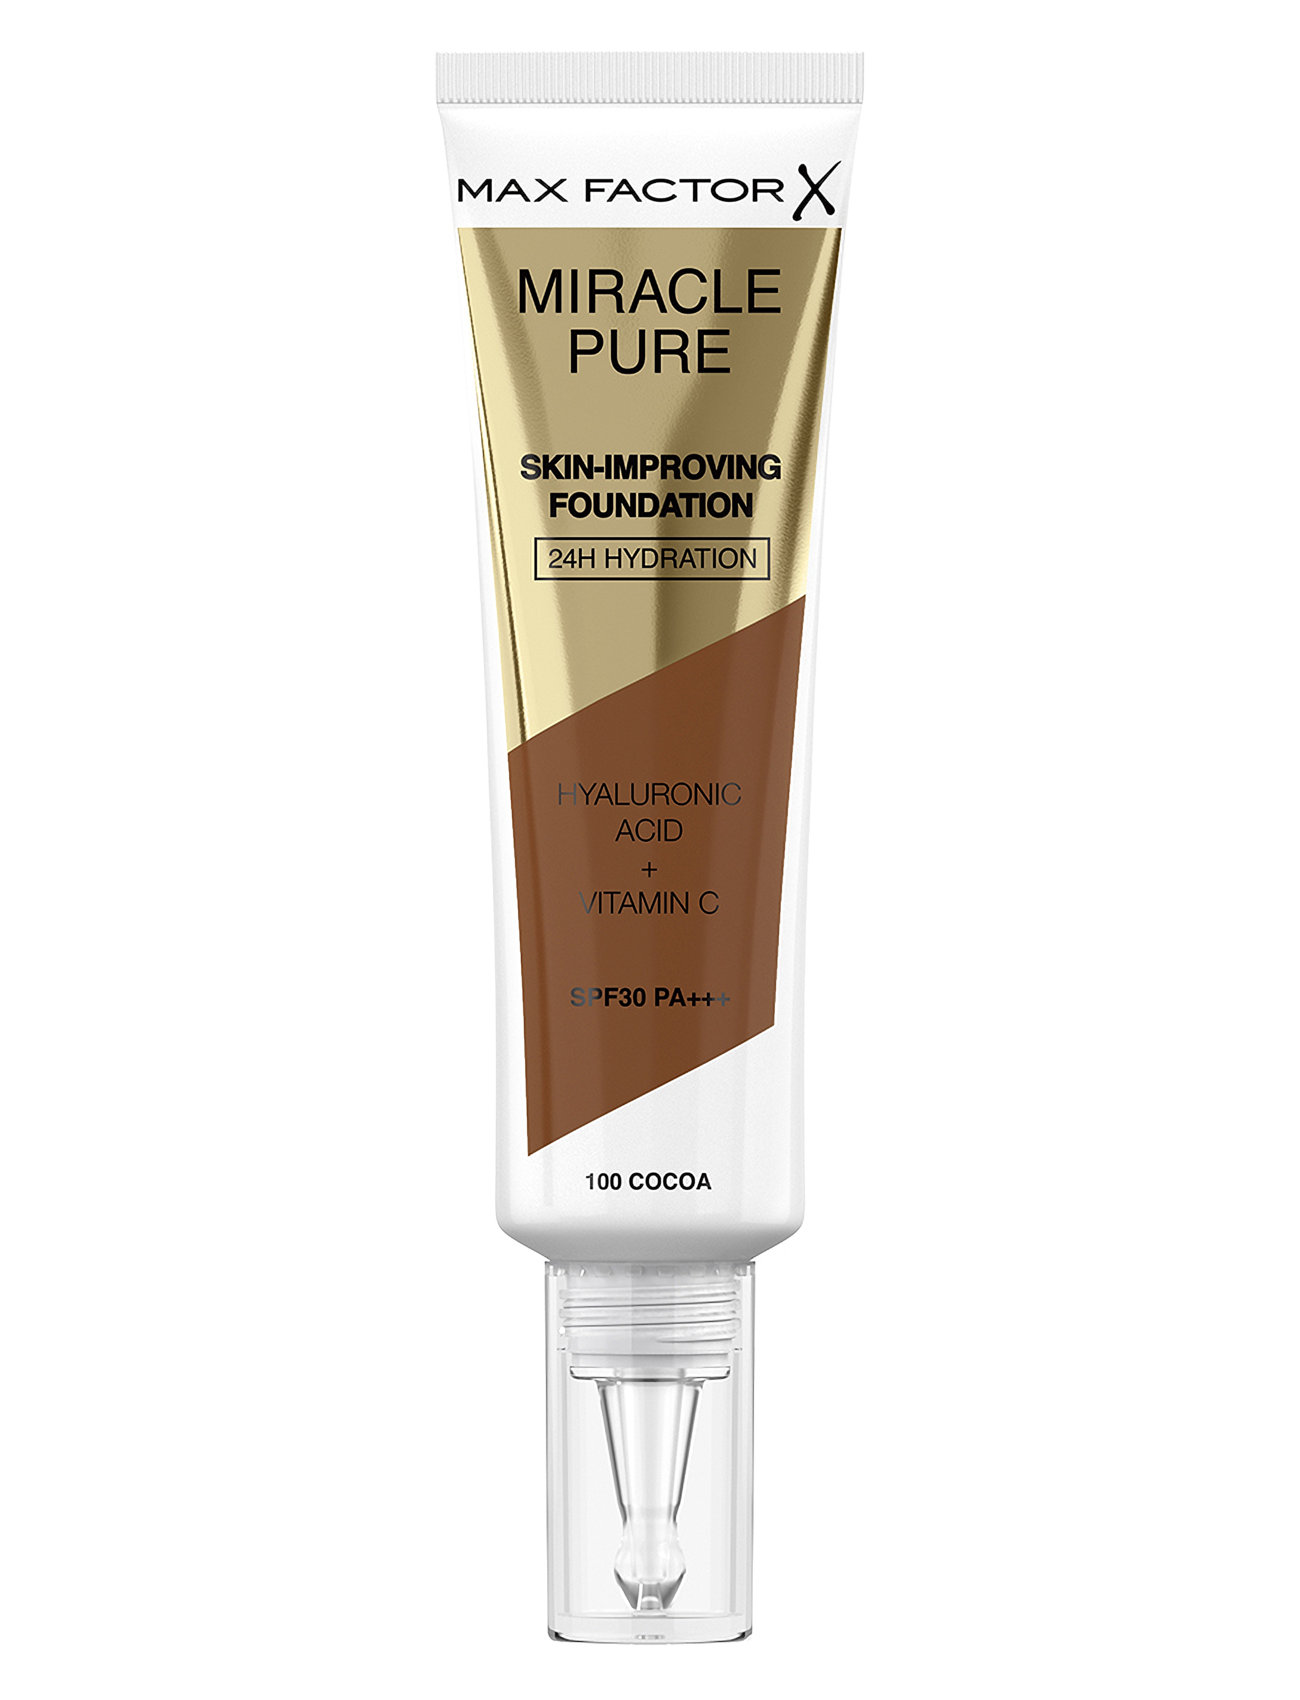 Max Factor Miracle Pure Foundation Foundation Makeup Max Factor